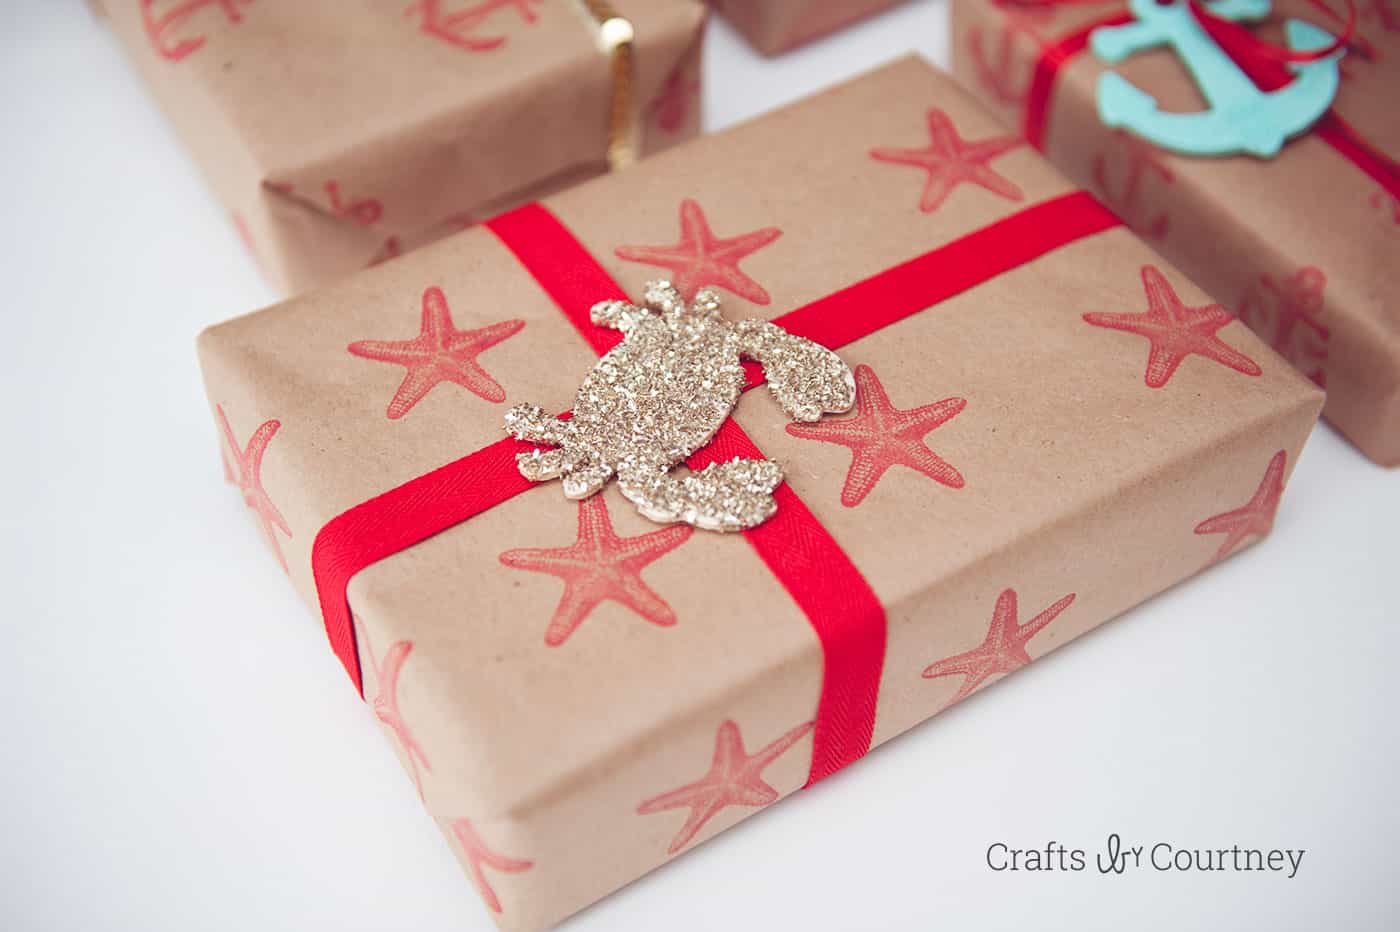 I fell in love with a beautiful nautical gift wrap from a magazine - so I decided to make my own DIY wrapping paper using stamps and glitter. So pretty!